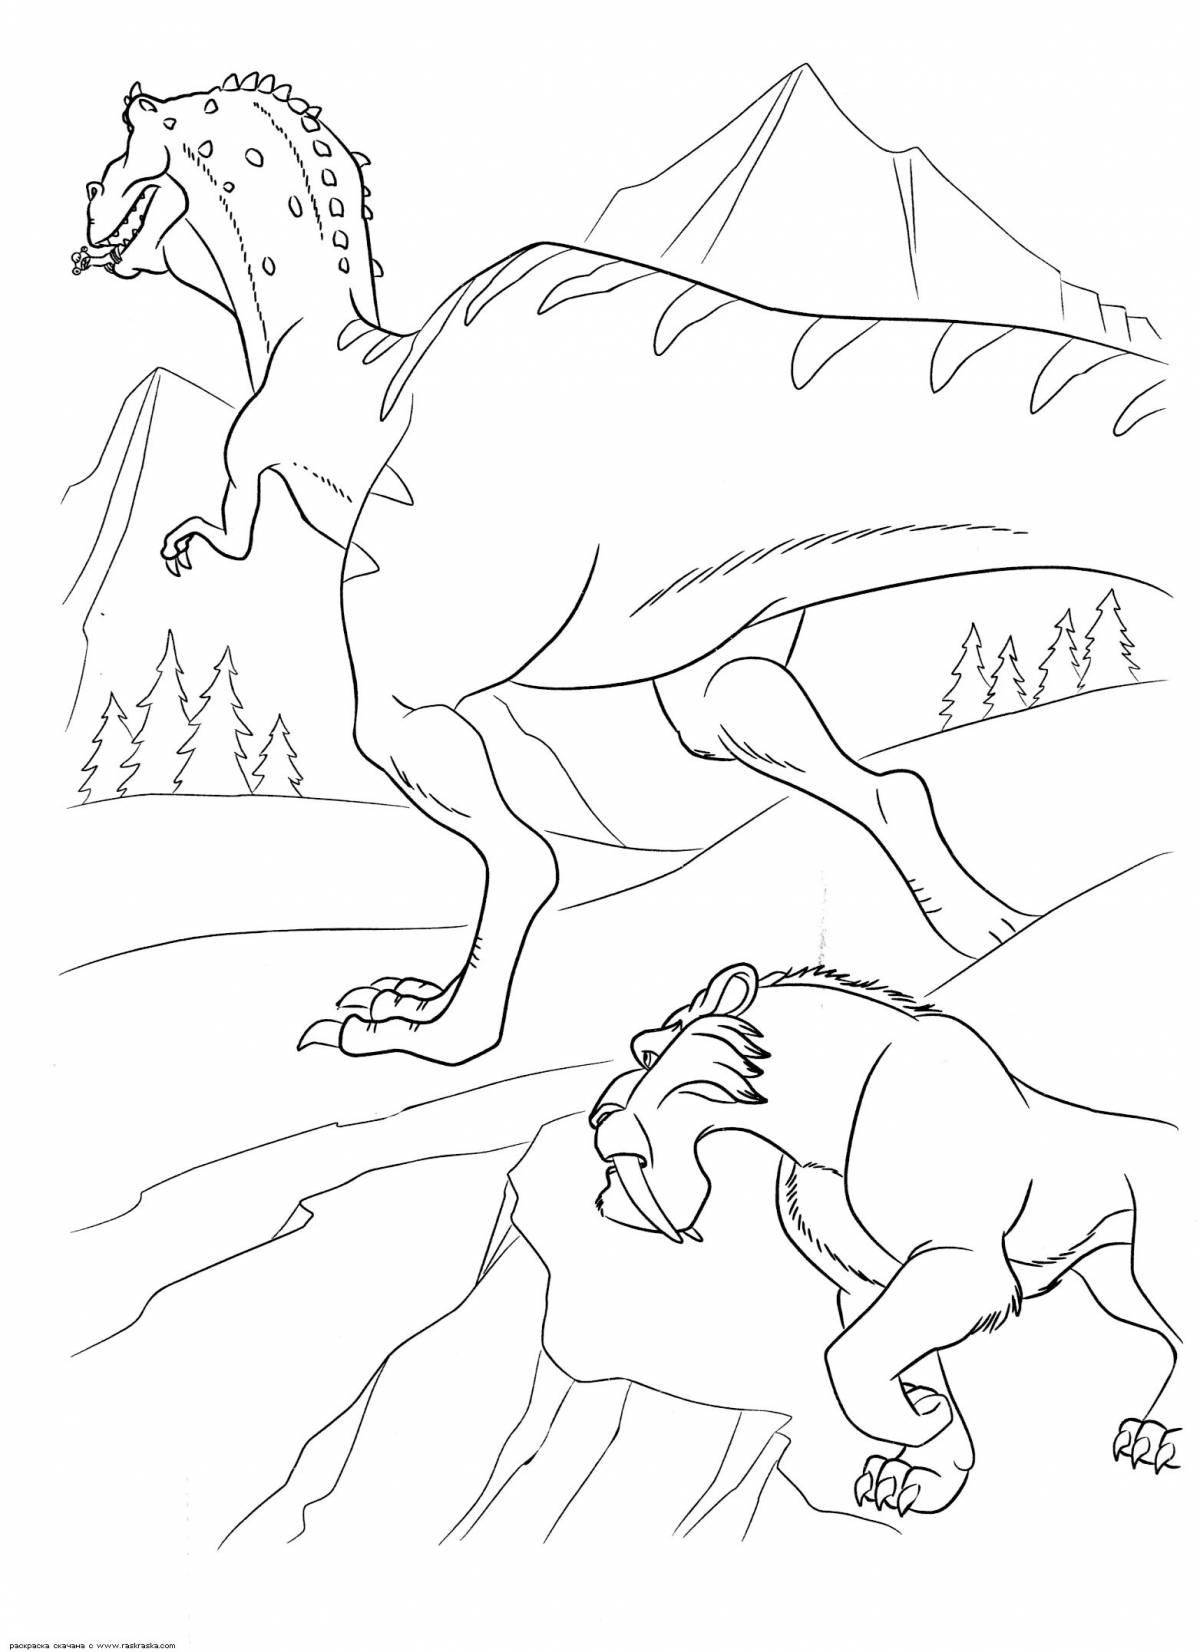 Amazing coloring book ice age 3 age of dinosaurs